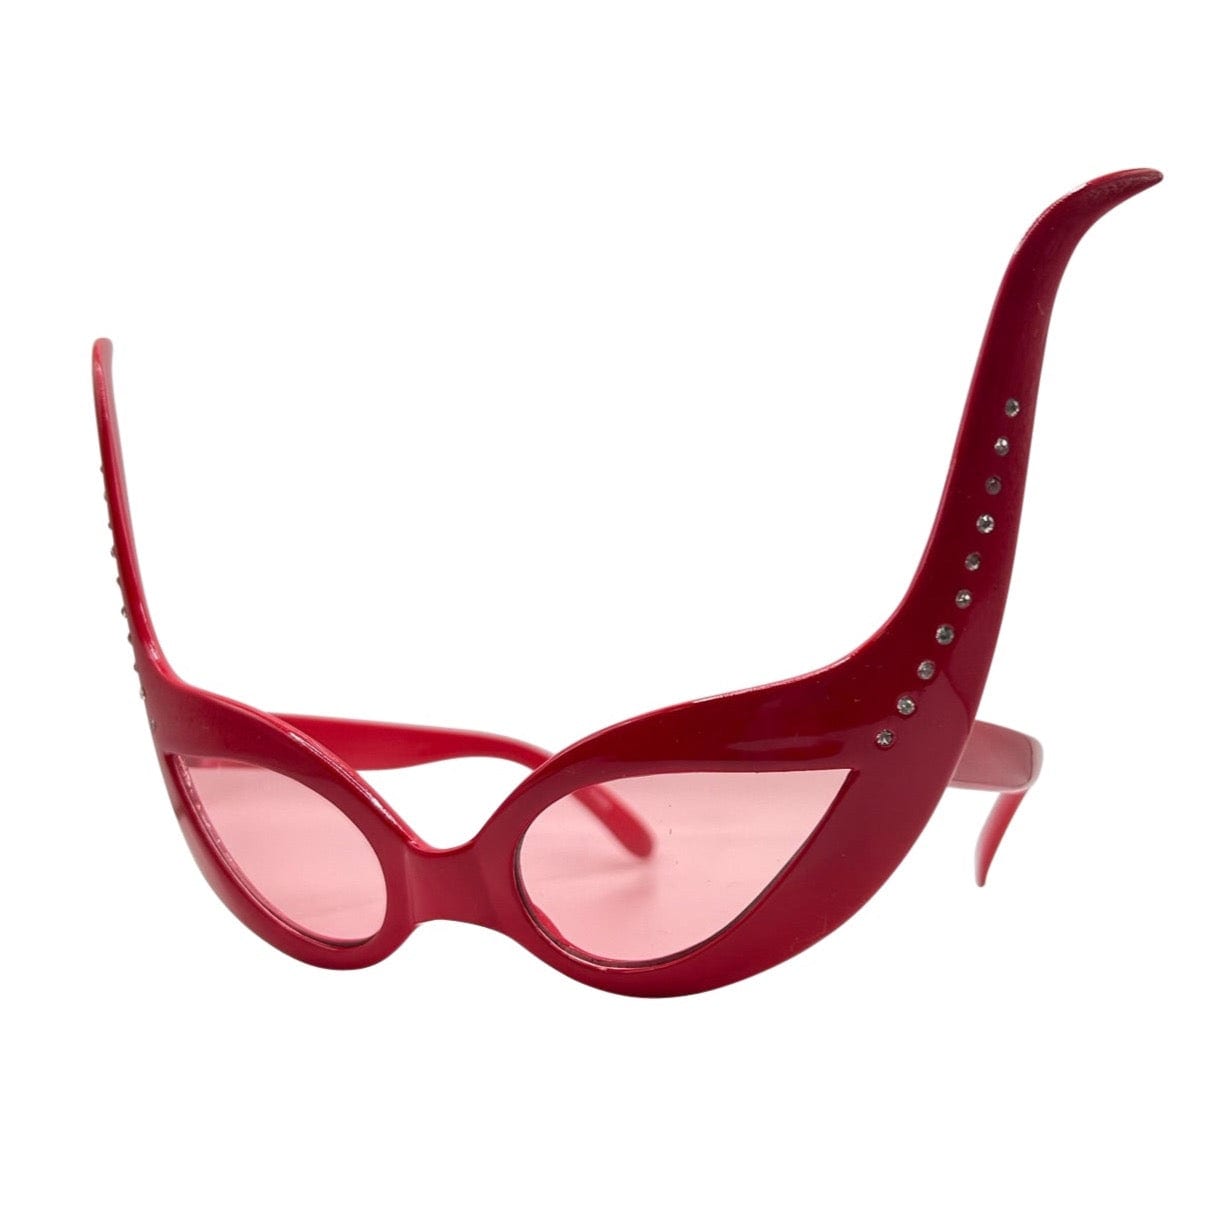 URSULA Red/Pink Extreme Cat-Eye Sunglasses